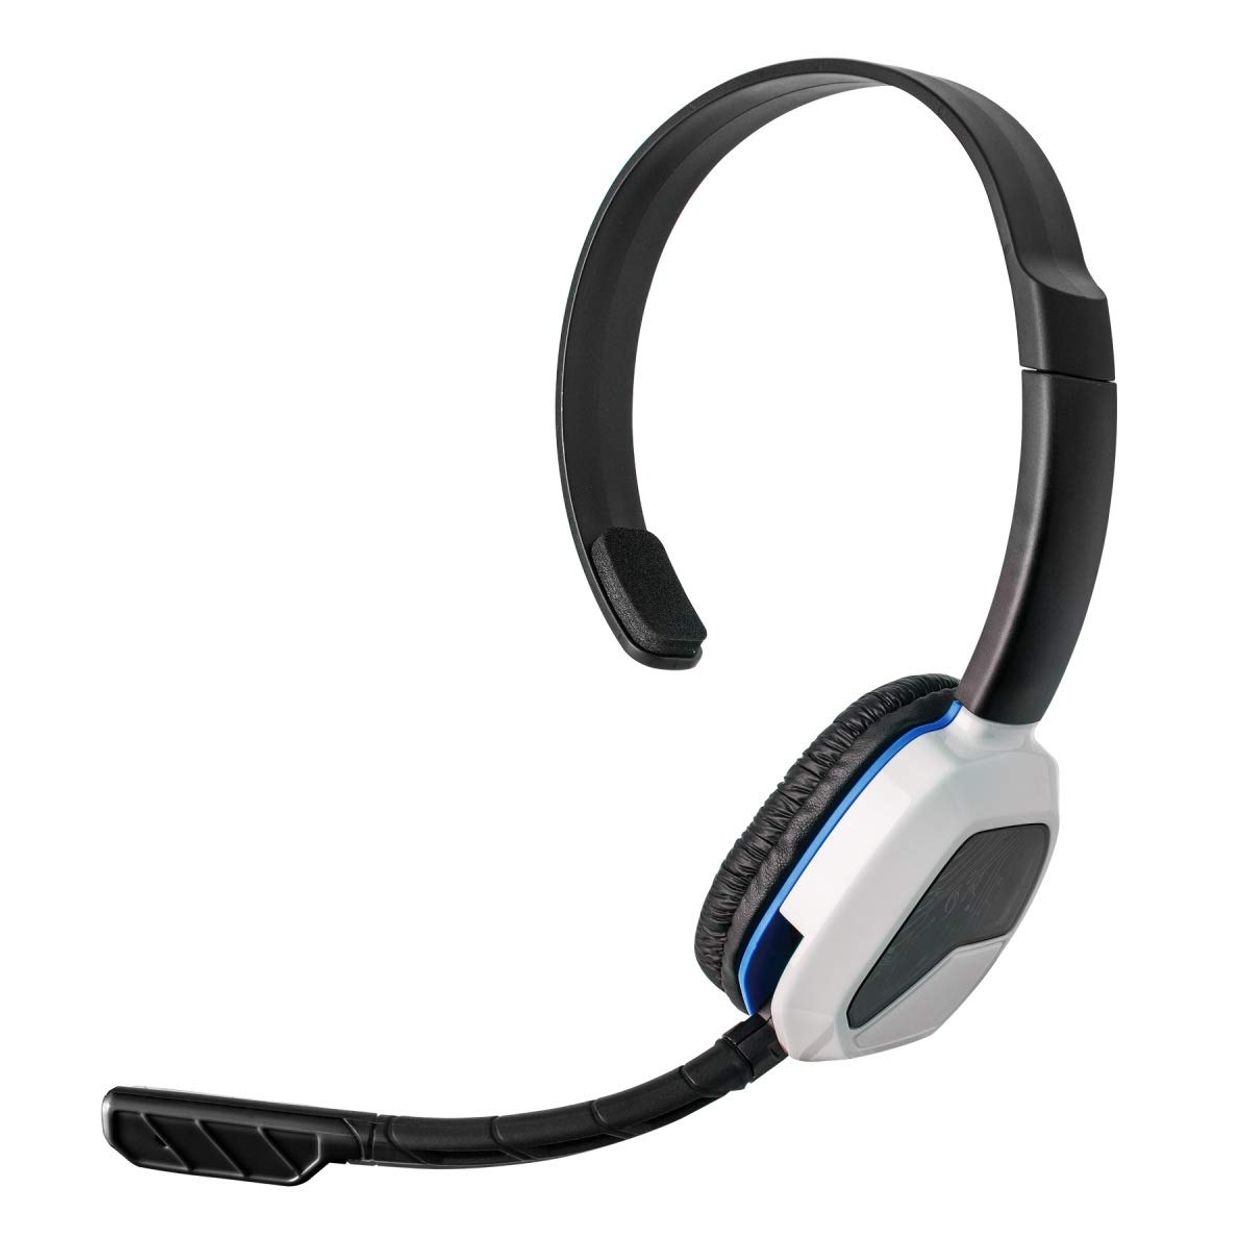 Open Box, Unused PDP Sony Afterglow LVL 1 Chat Headset